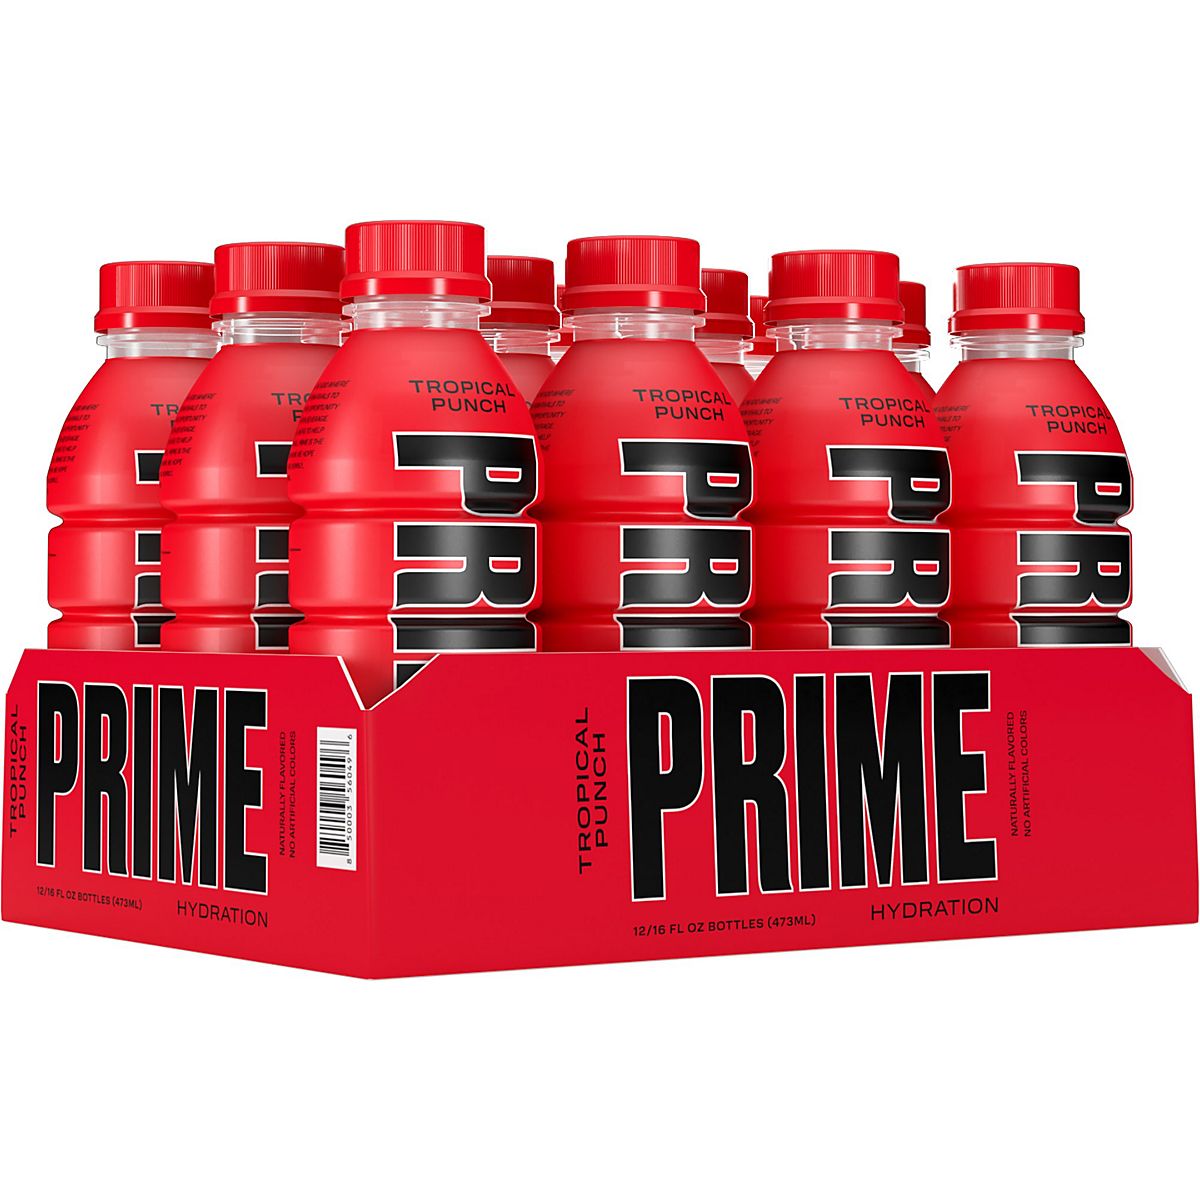 Prime 16 oz Tropical Punch Hydration Drink 12-Pack